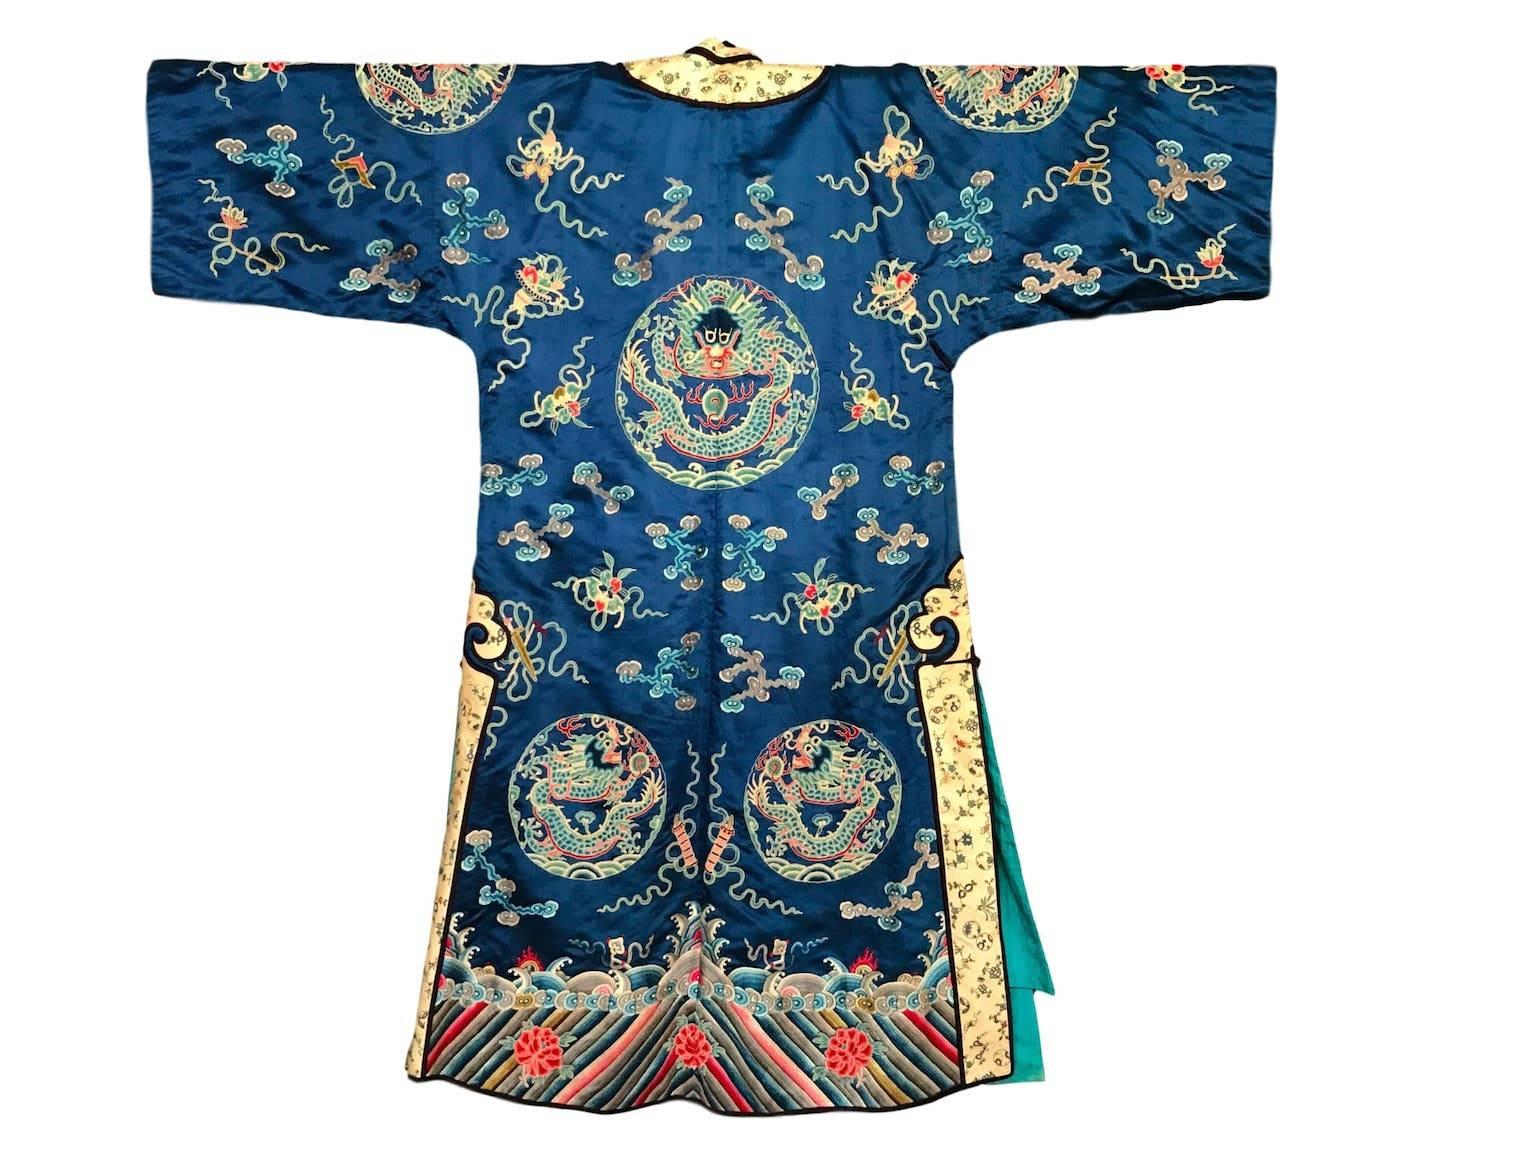 C1910 blue silk satin Chinese Coat with open stitch embroidery has fine silk lining and wide sleeves. 
In excellent condition. 
27 inches across chest. 27 inches across shoulders. 55 inches across whole garment and 54 inches total length